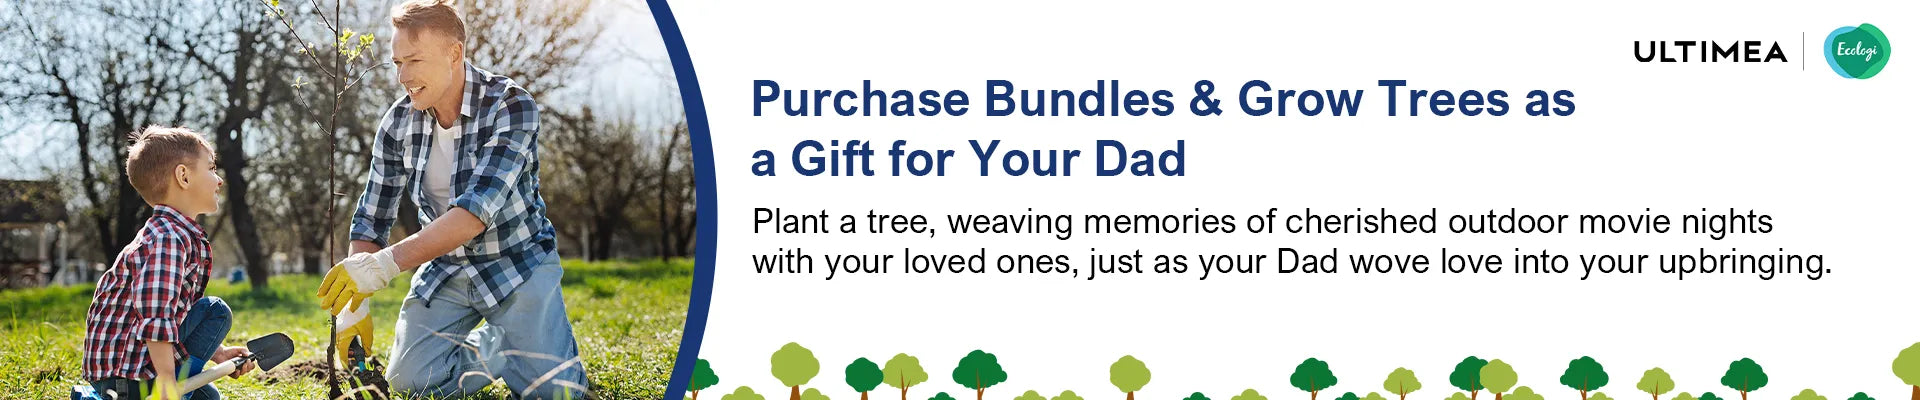 Plant a tree, weaving memories of cherished outdoor movie nights with your loved ones, just as your Dad wove love into your upbringing.